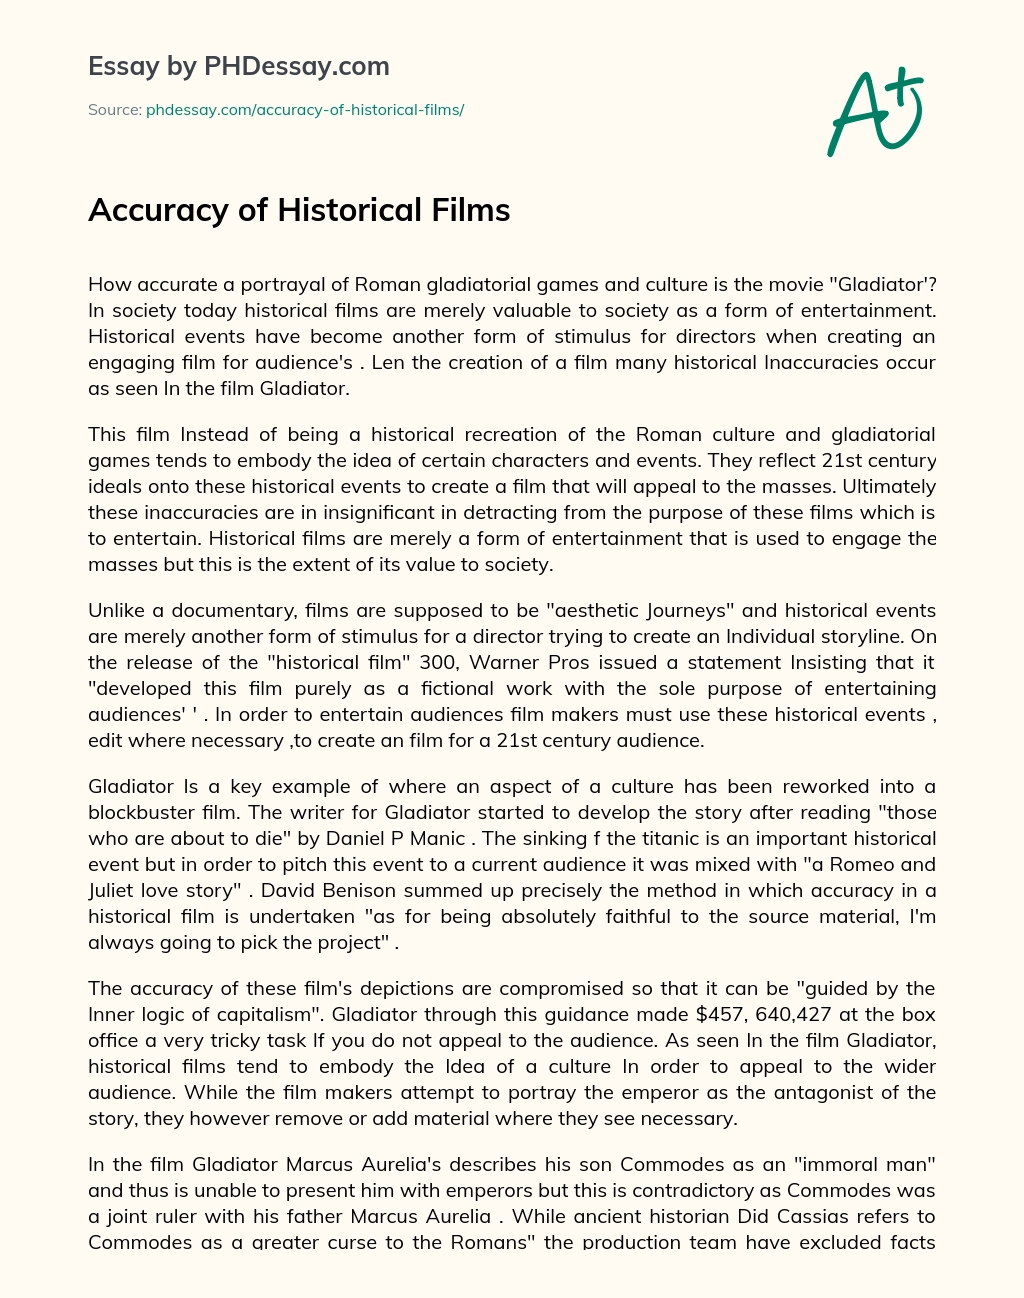 Accuracy of Historical Films essay